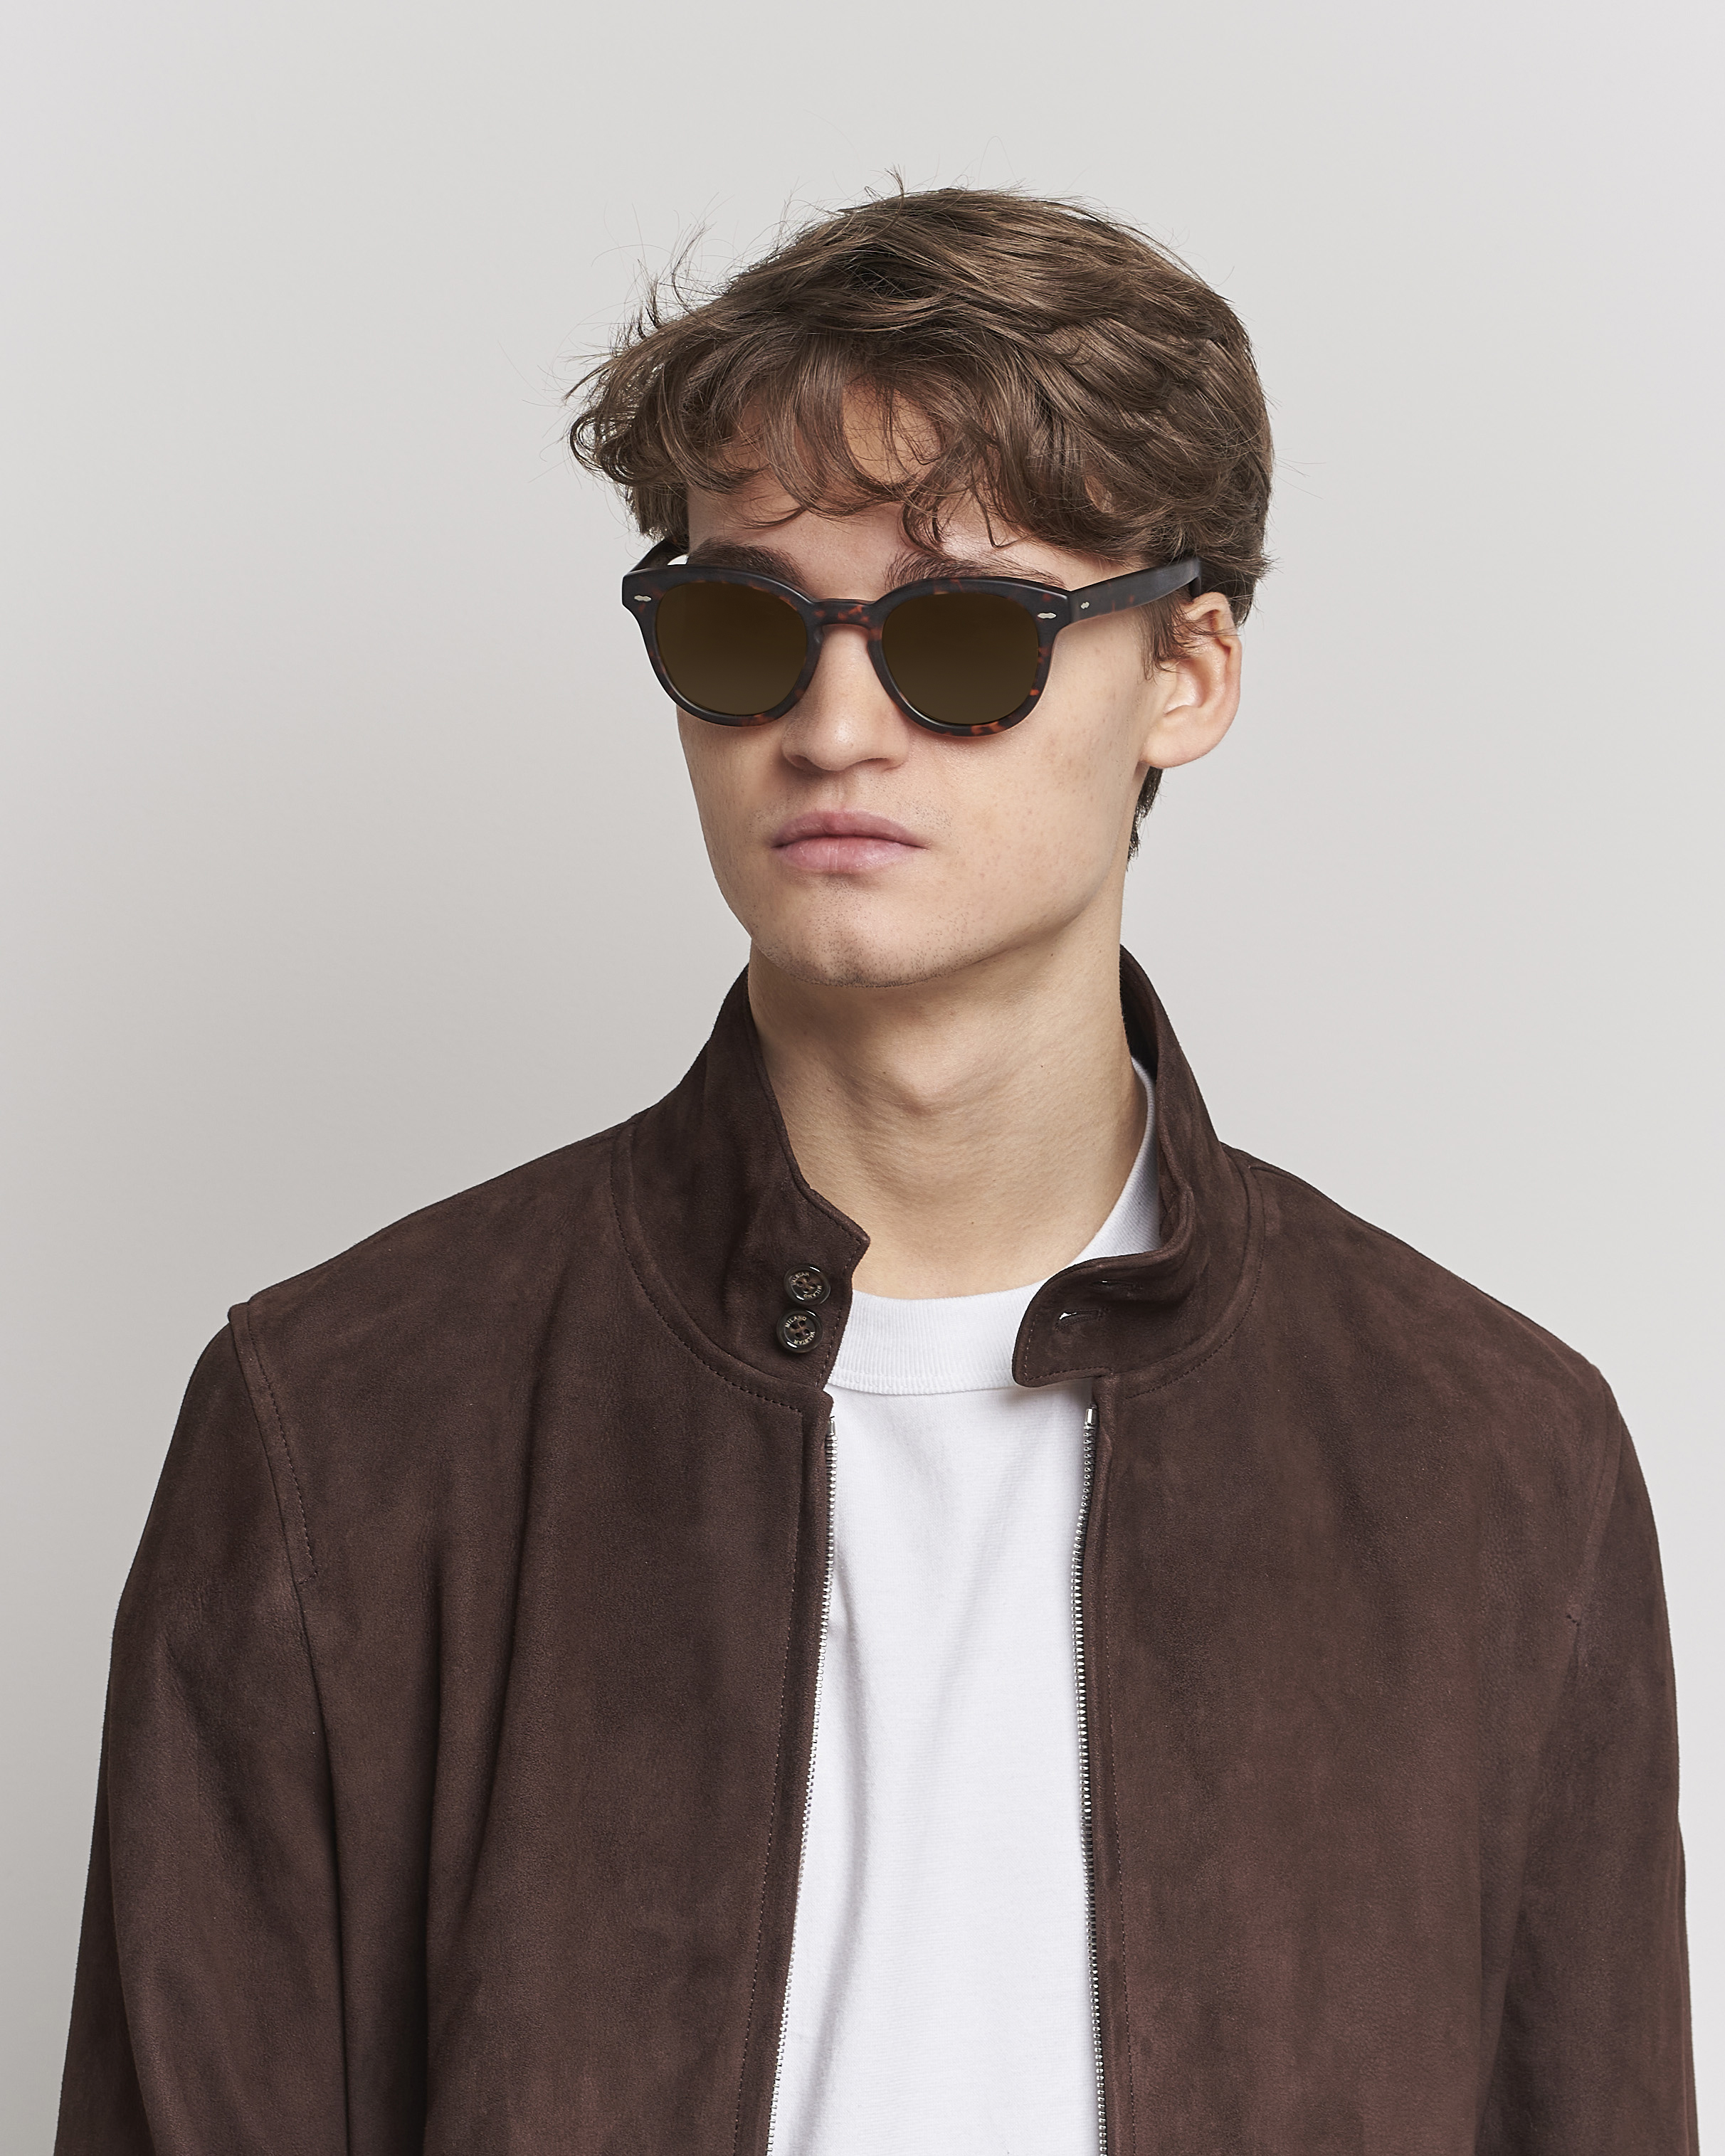 Hombres | Oliver Peoples | Oliver Peoples | Cary Grant Sunglasses Semi Matte Tortoise